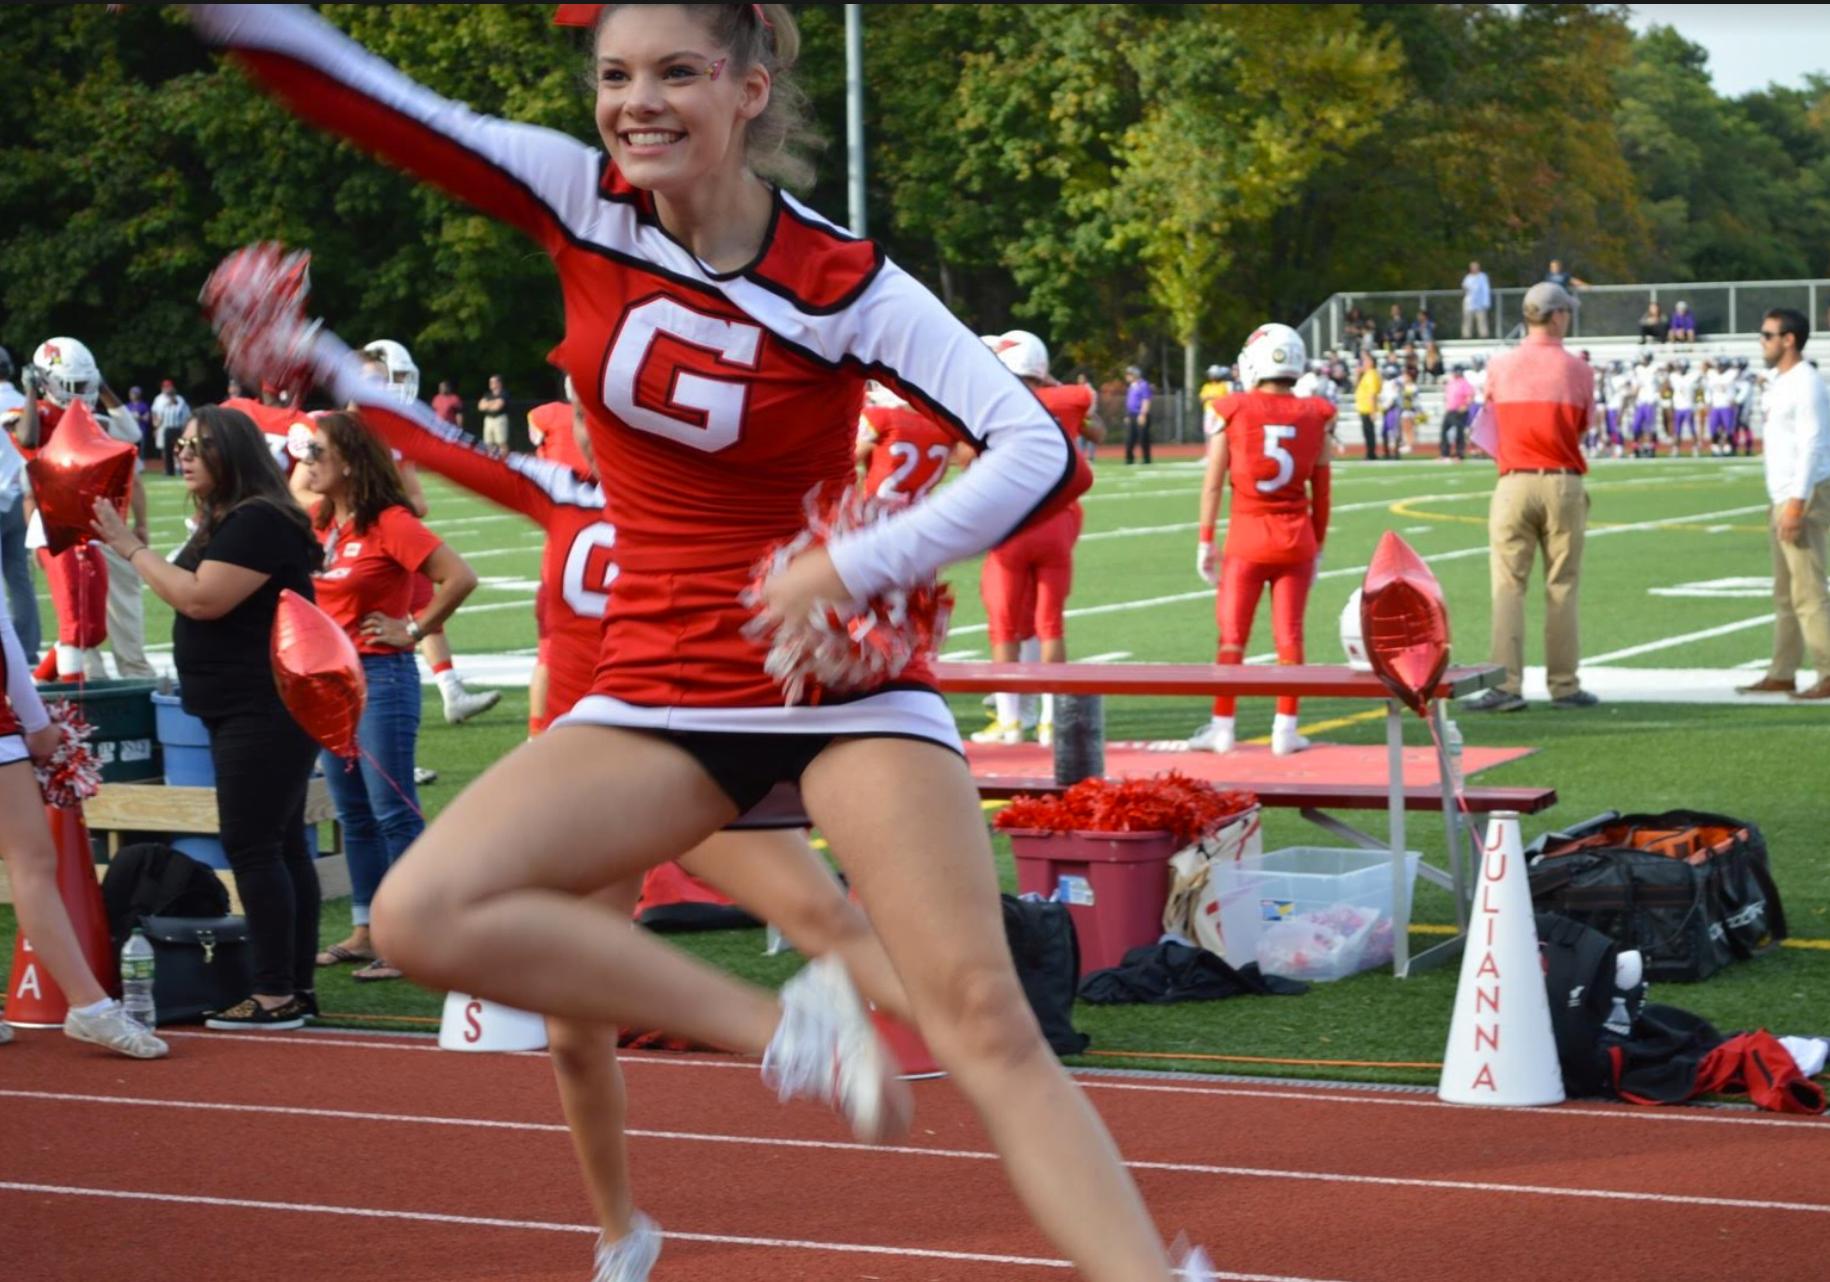 GHS cheerleaders perform at the homecoming football game against Westhill on Oct 21, 2017 Photo Monique Nikolov